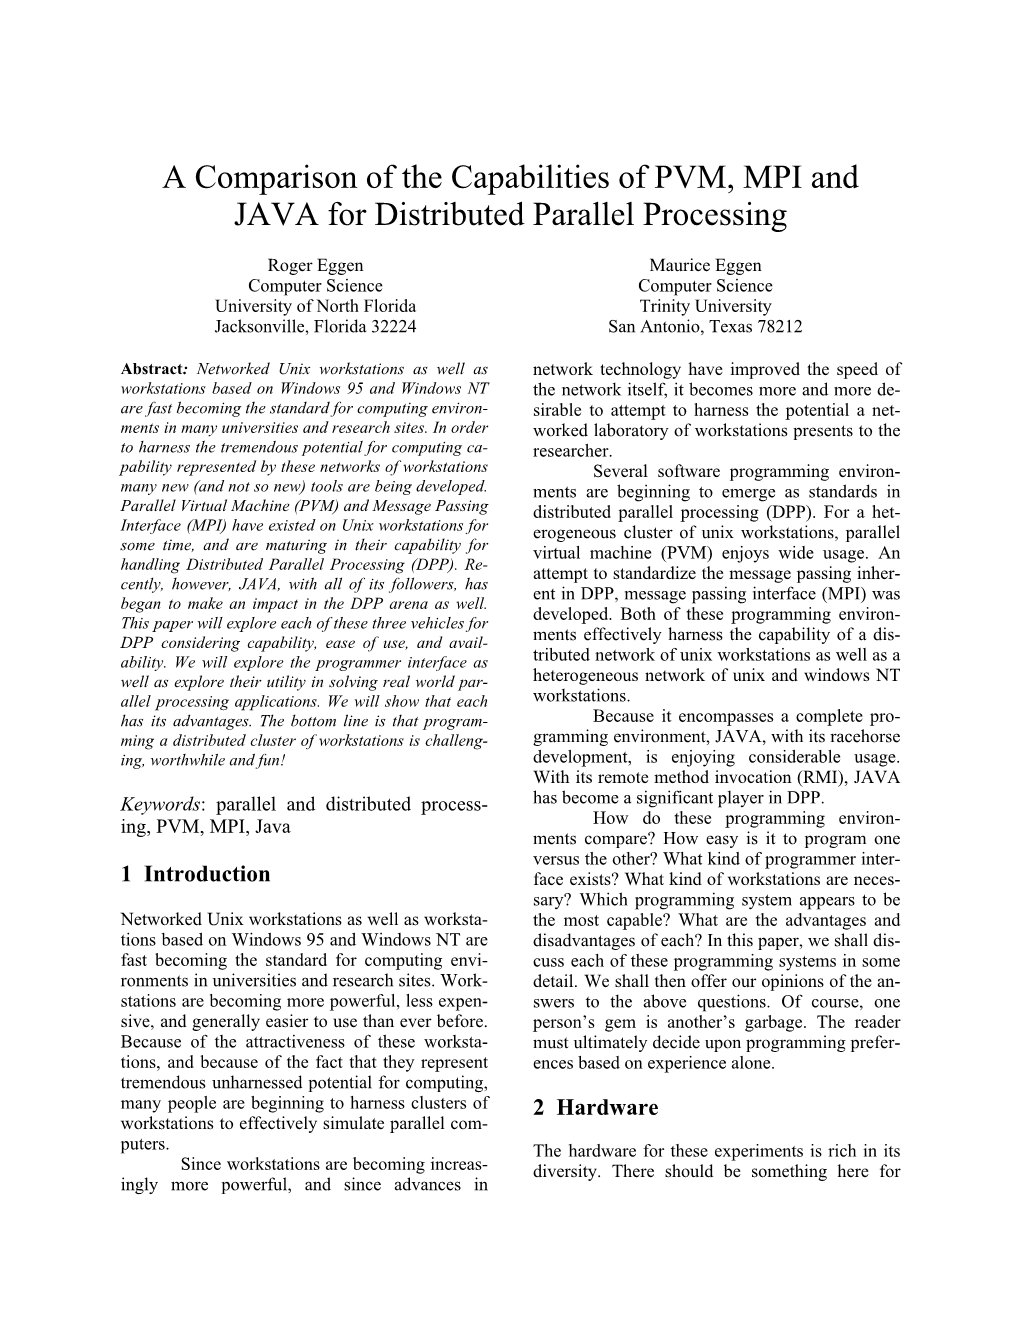 A Comparison of the Capabilities of PVM, MPI and JAVA for Distributed Parallel Processing